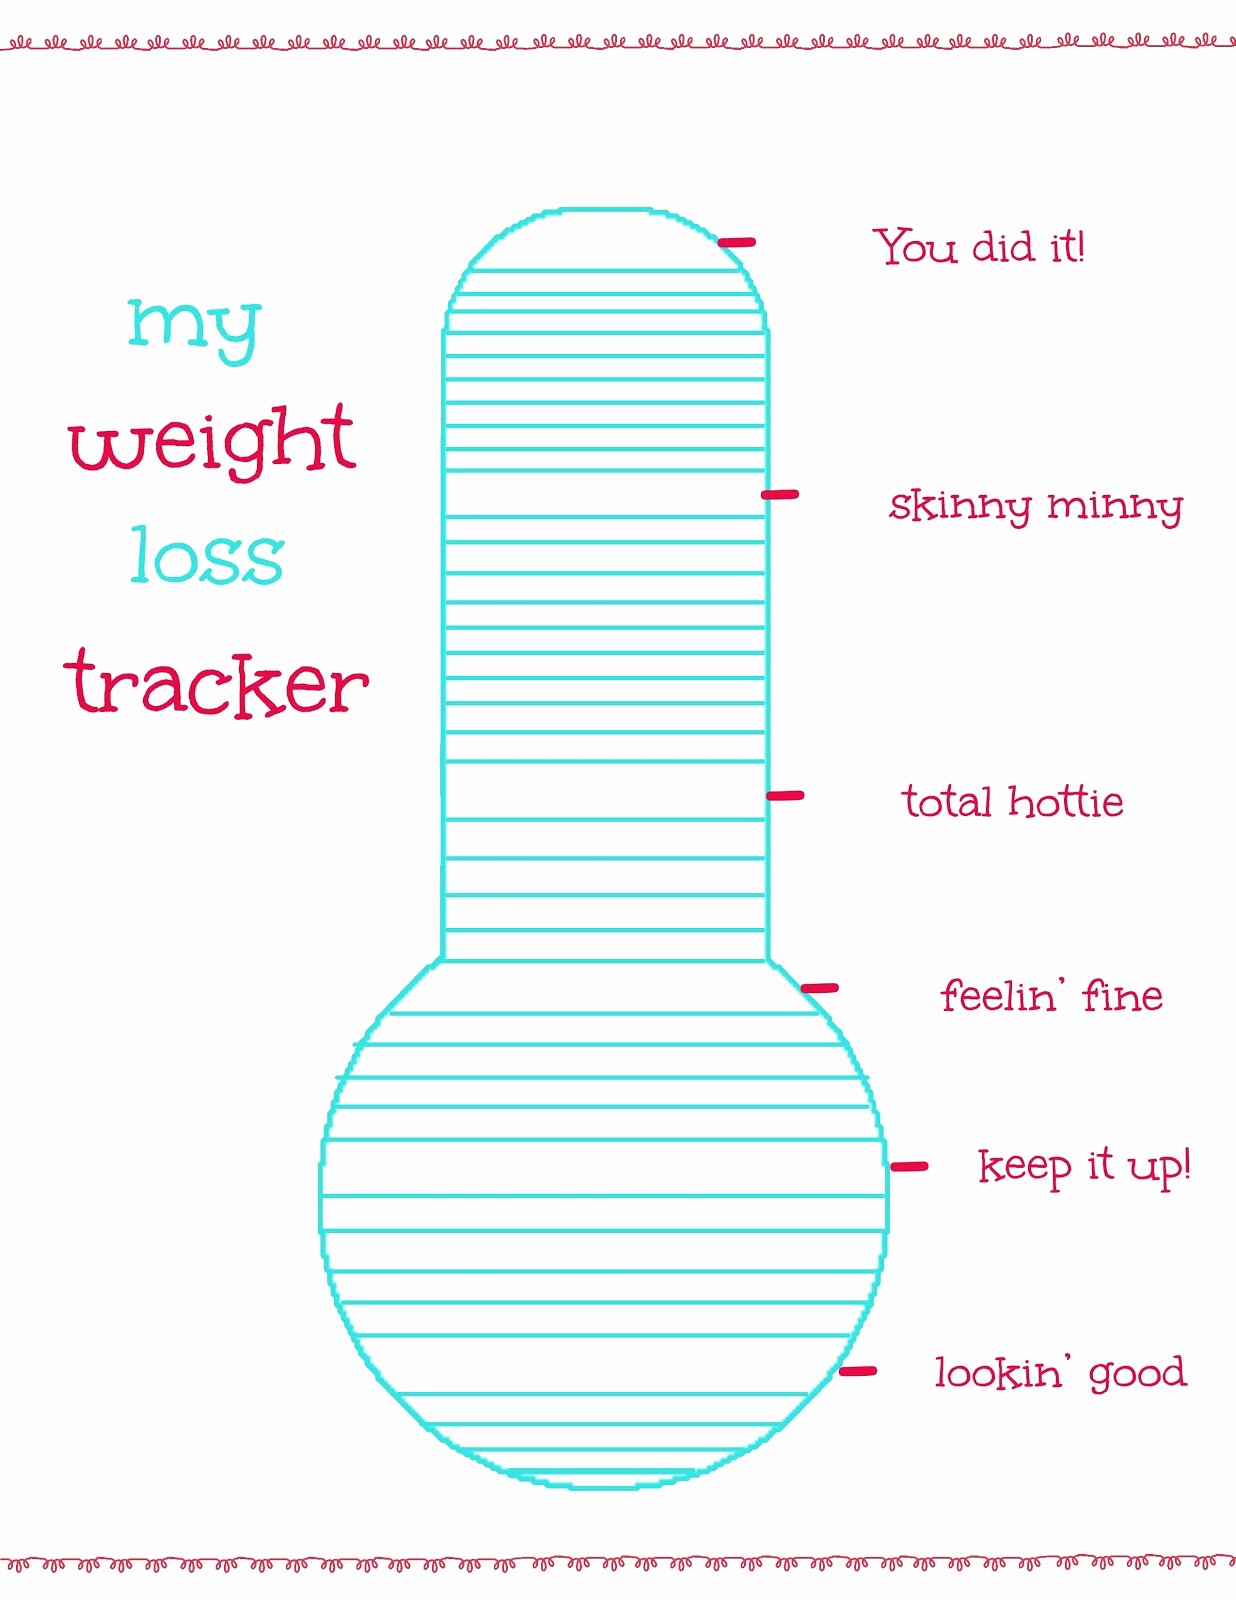 Free Printable Weight Loss Tracker Lovely Search Results for “free Blank Weight Tracking Sheet